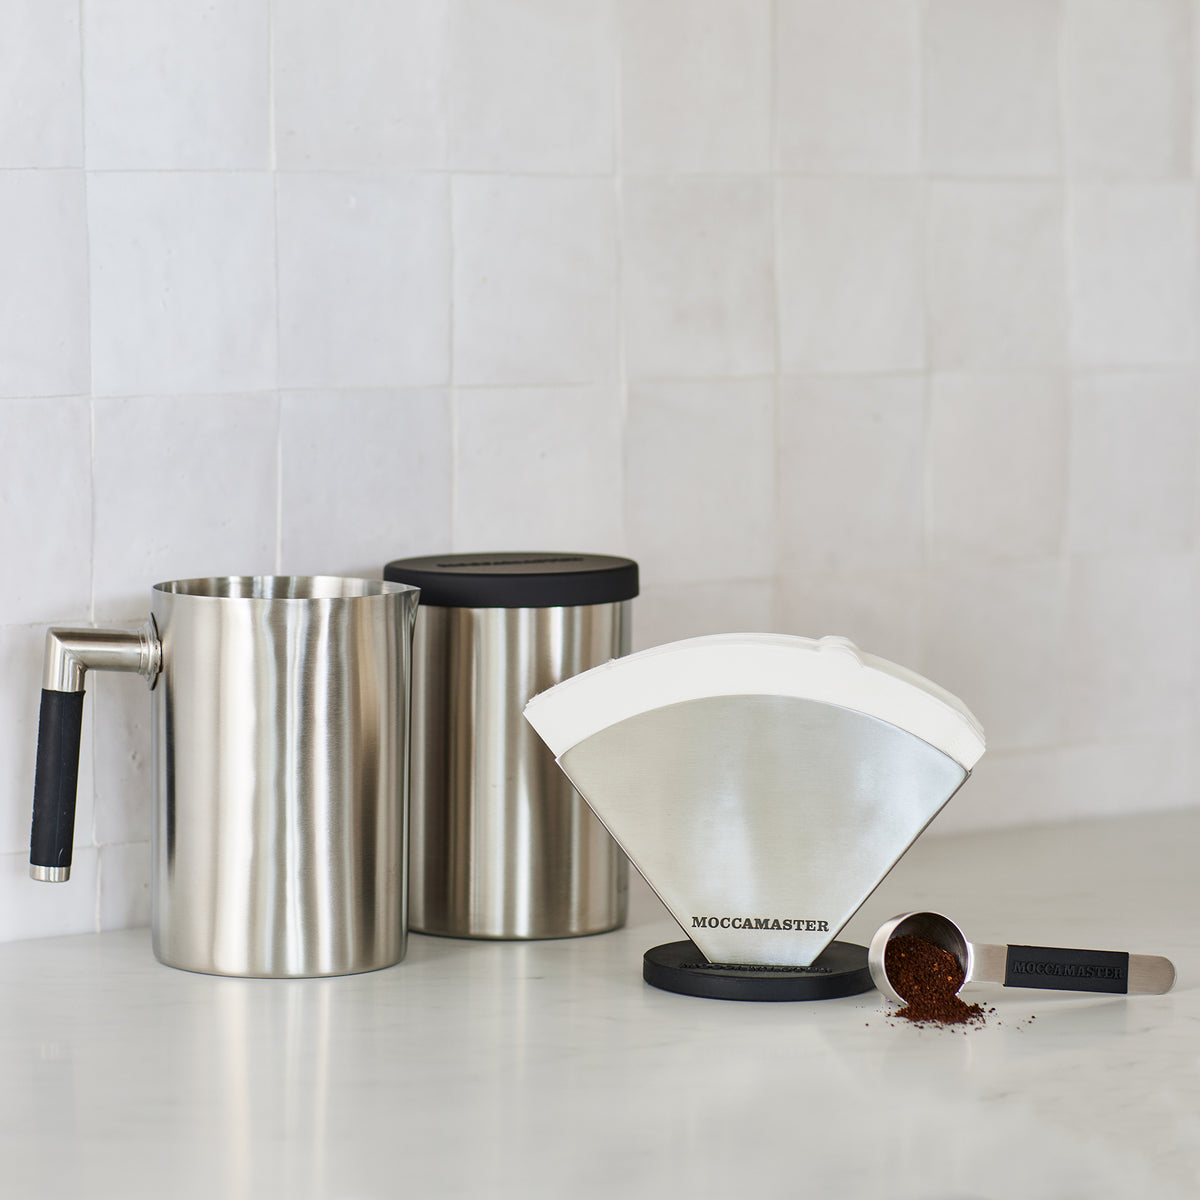 A collection of stainless steel Moccamaster accessories, including a filter holder, coffee scoop, coffee canister, and water jug.